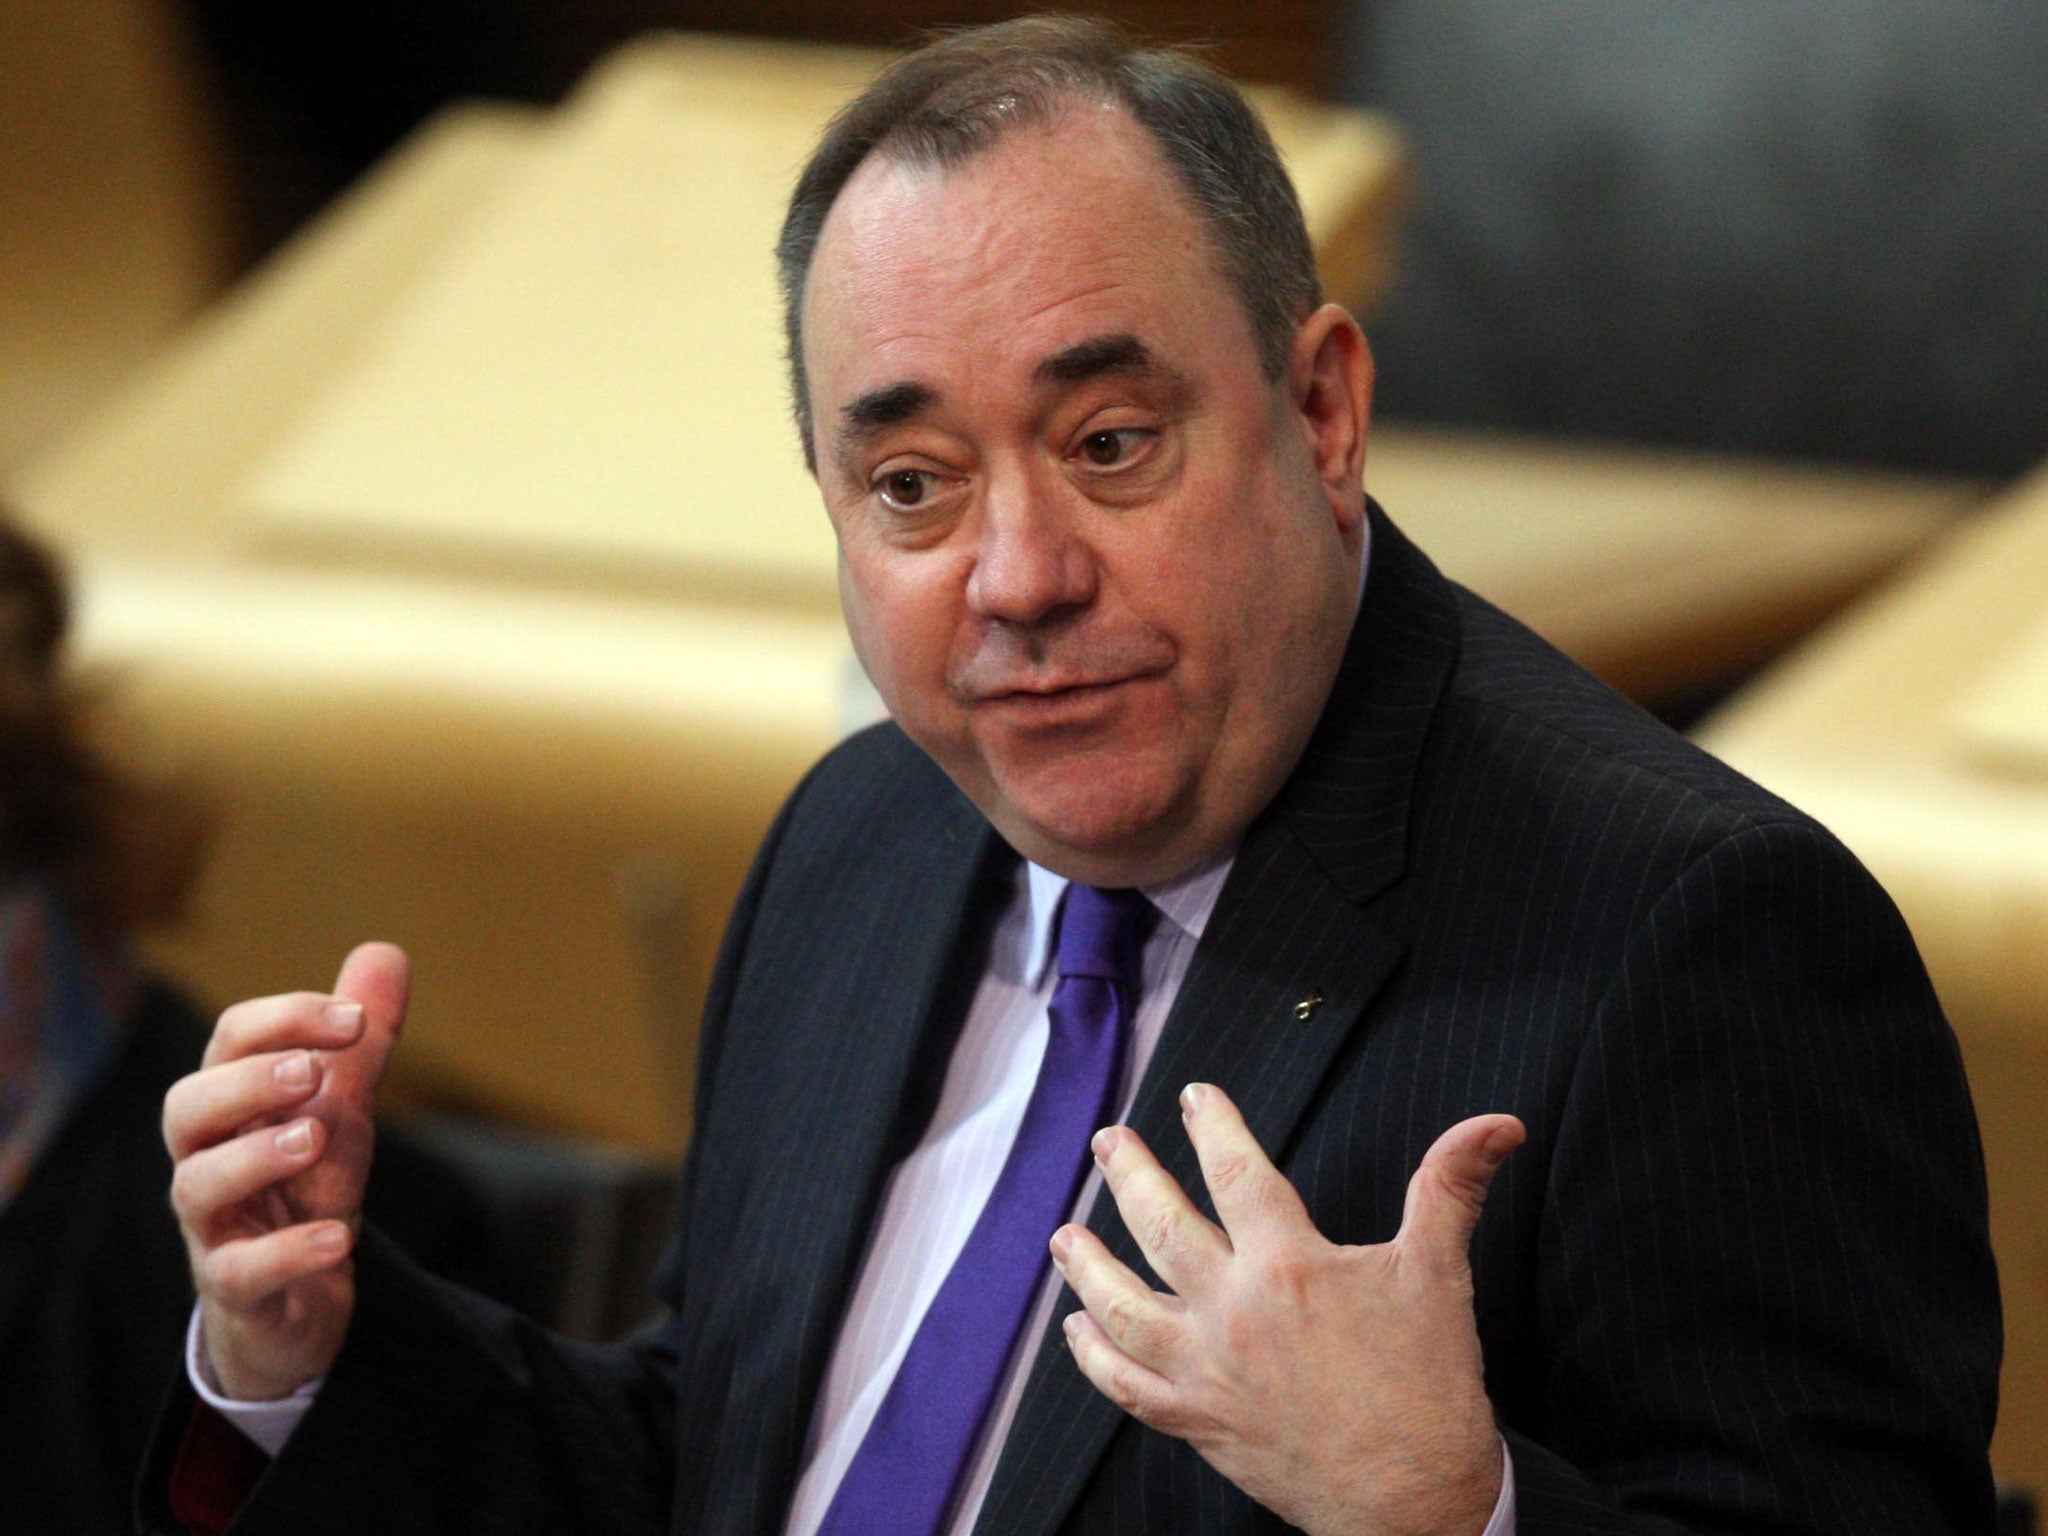 Alex Salmond: 'Scotland quite clearly will remain part of the European Union...'